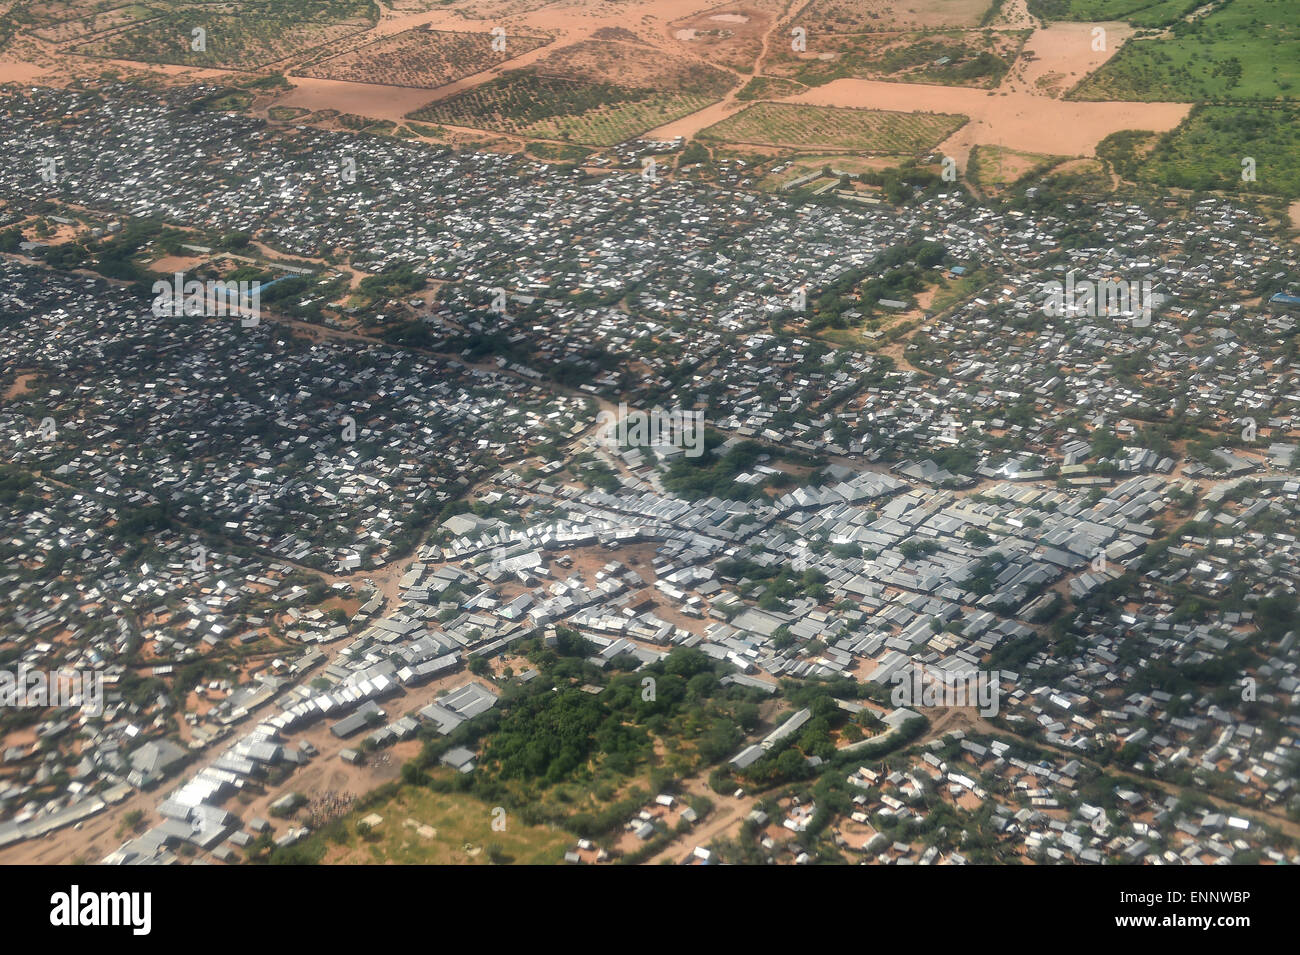 (150509) --DADAAB, May 9, 2015 (Xinhua) -- Photo taken on May 8, 2015 shows an overlook of Dadaab refugee camp, Kenya. Dadaab, the world's largest refugee camp in northeastern Kenya, currently houses some 350,000 people. For more than 20 years, it has been home to generations of Somalis who have fled their homeland wracked by conflicts. (Xinhua/Sun Ruibo) (djj) Stock Photo